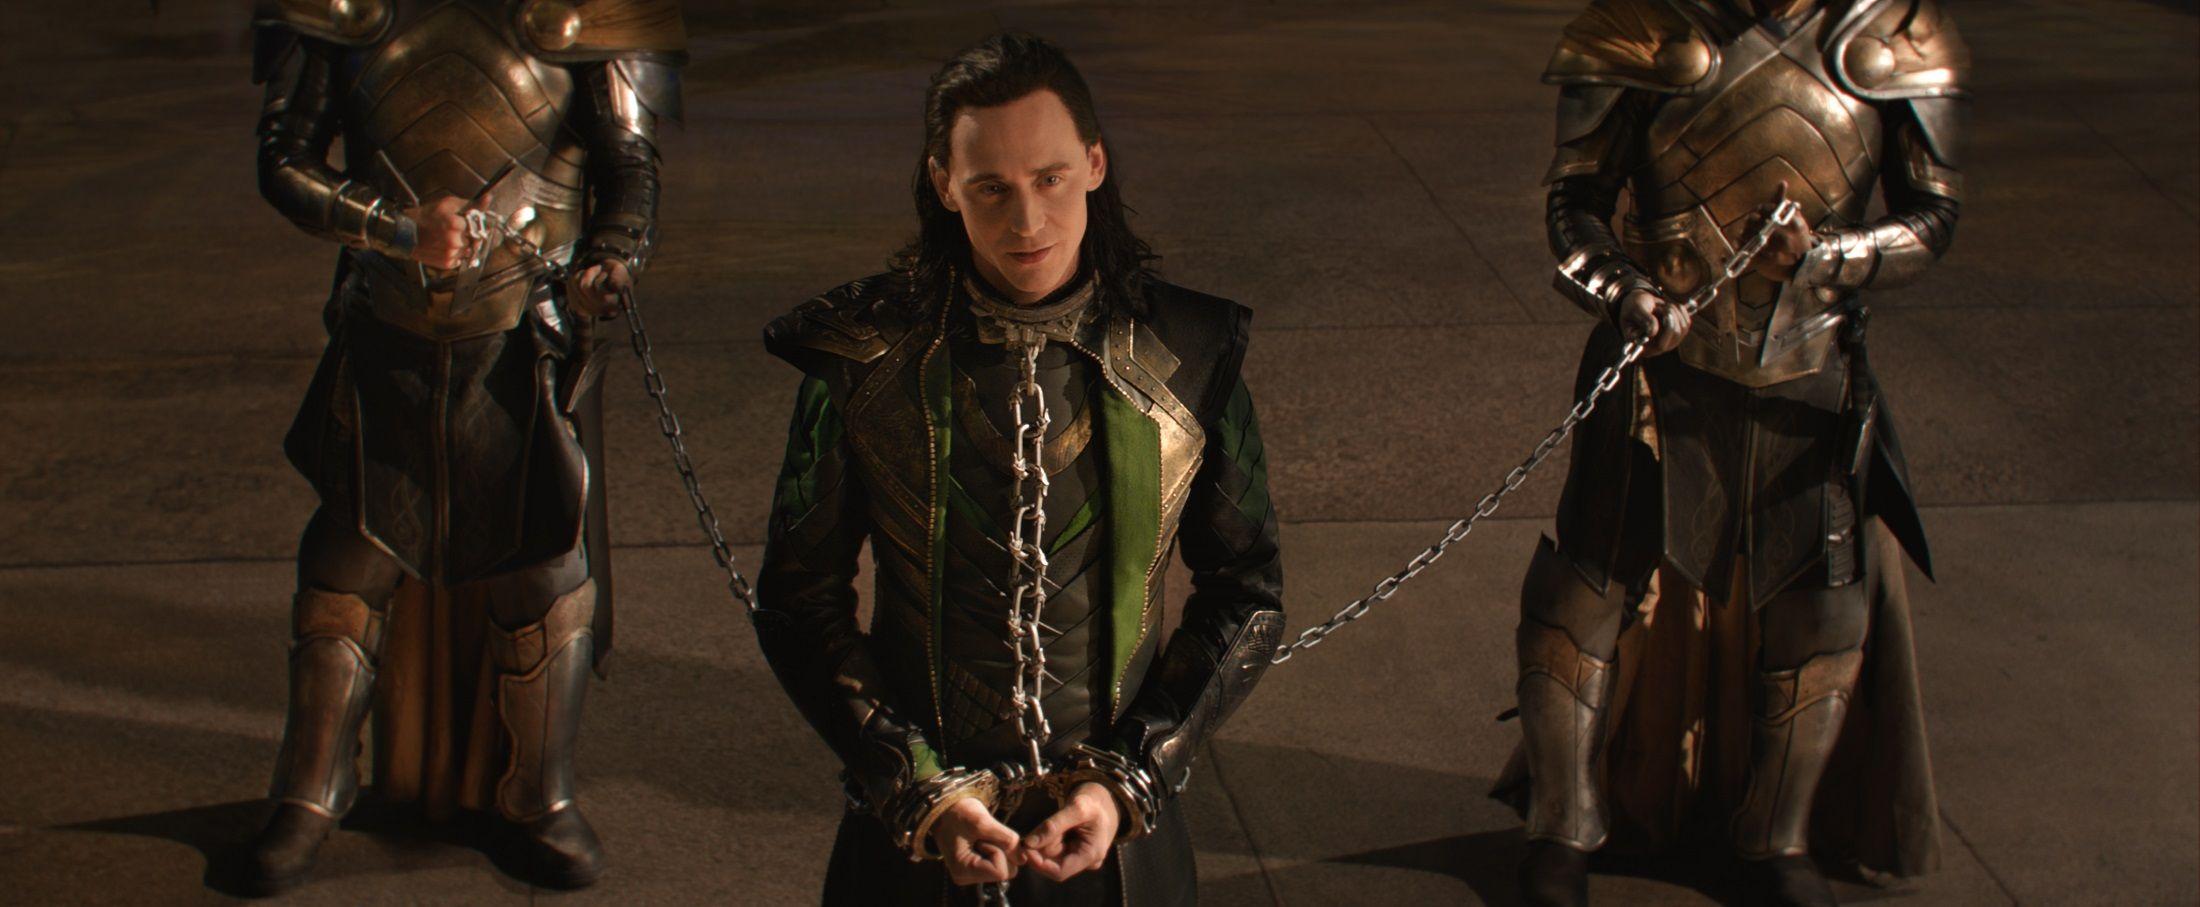 Why The Internet (Including SNSD) Is Obsessed With Loki AKA Tom